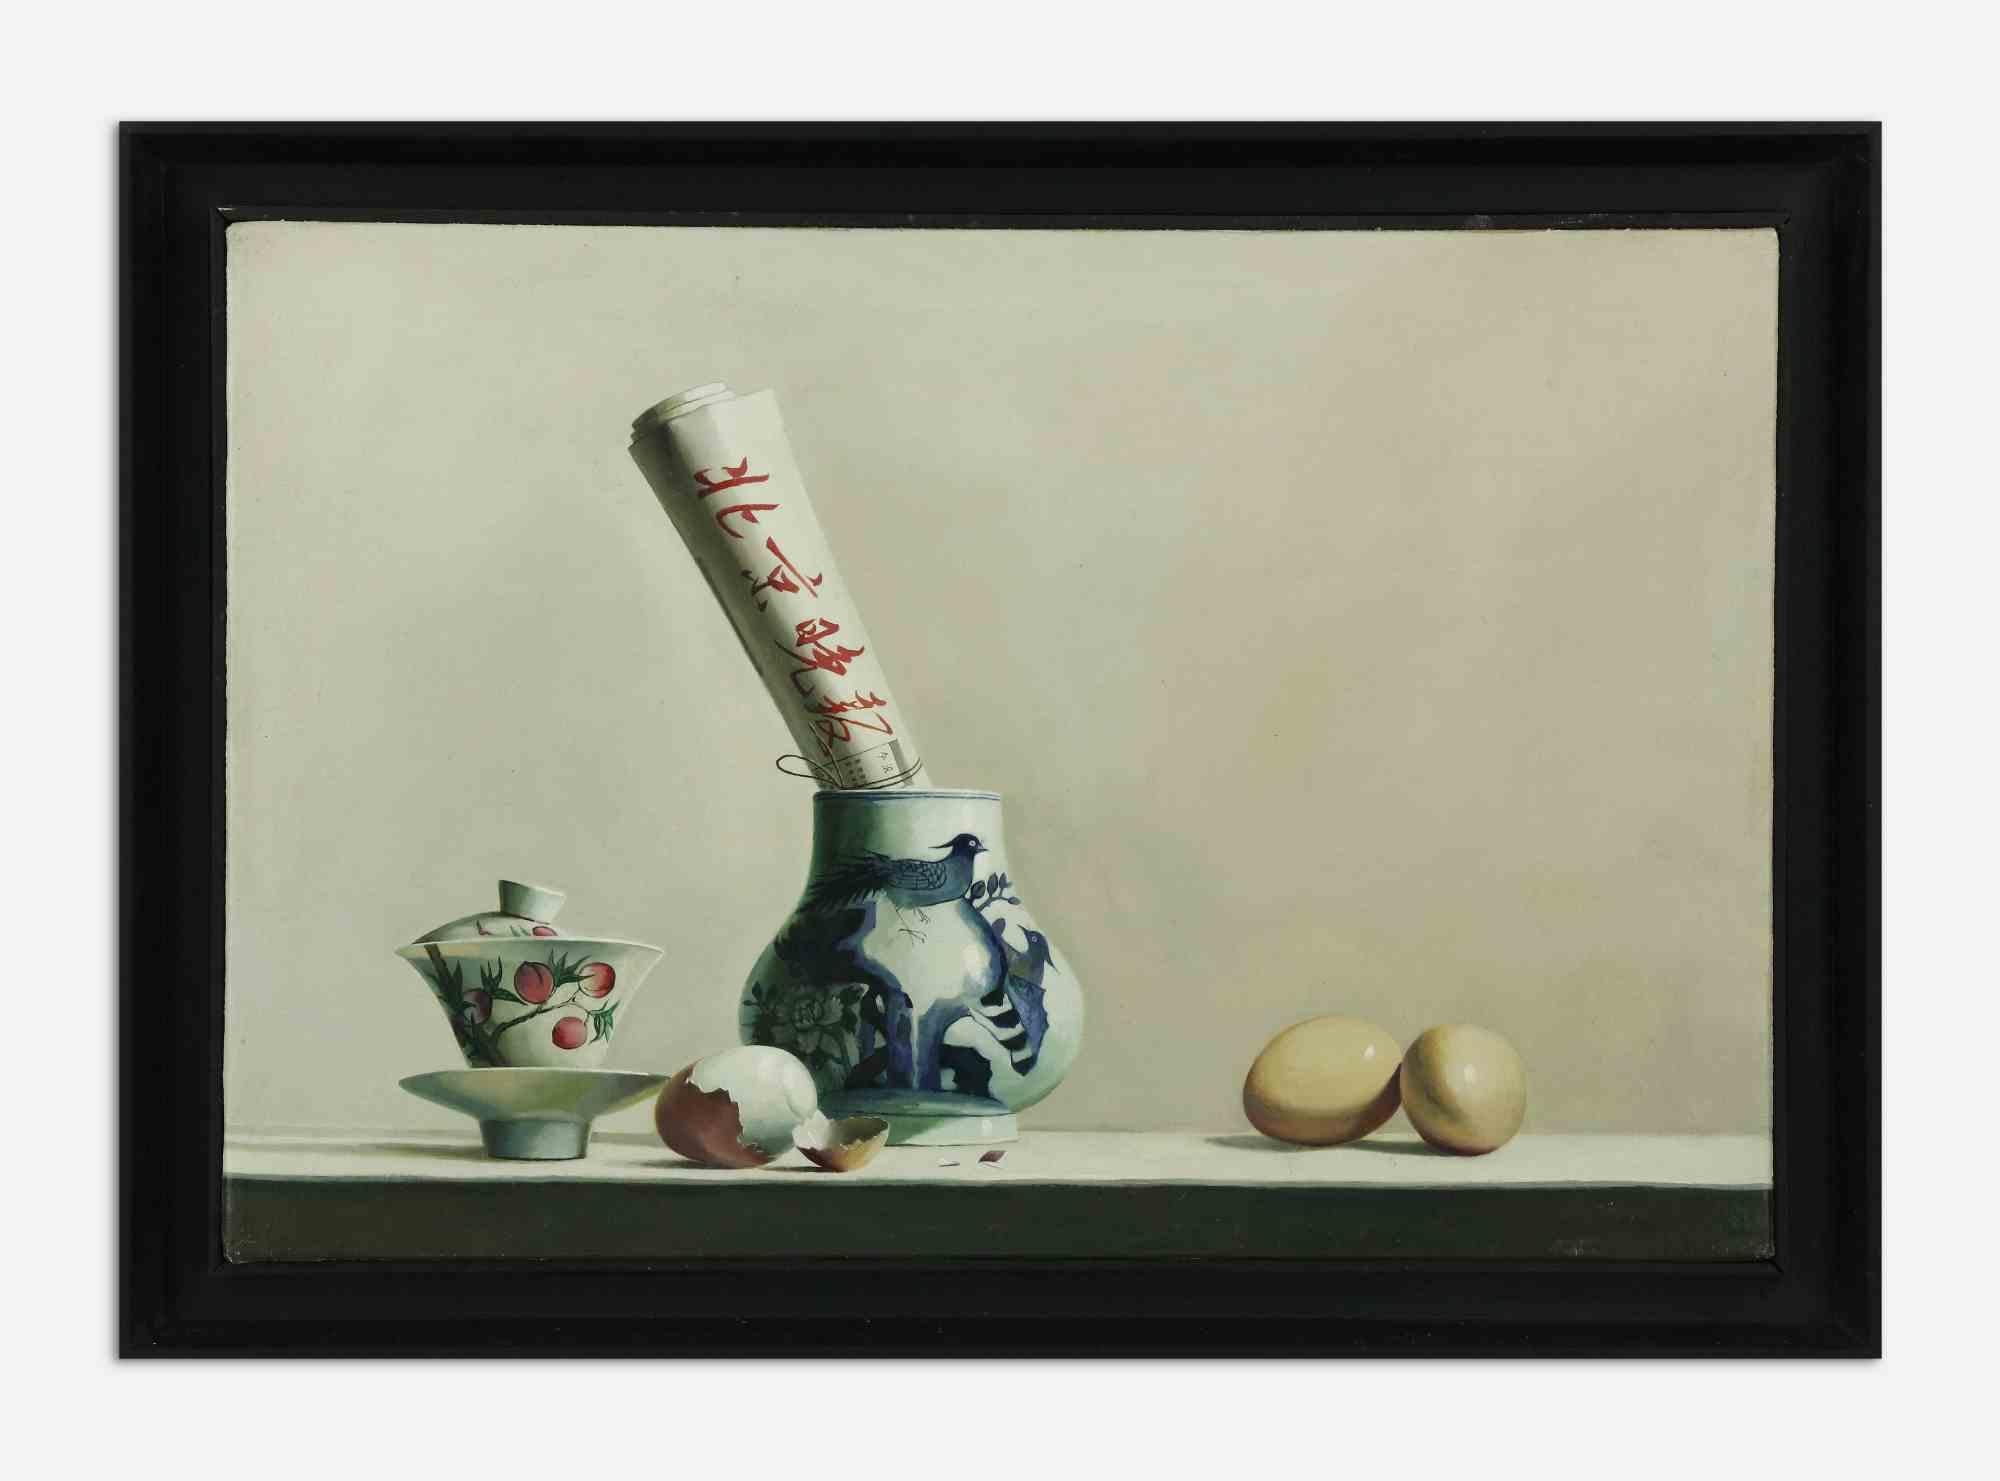 Breakfast is an original oil painting realized in 2007 by Zhang Wei Guang (Mirror).

Beautiful oil painting on canvas. 

Includes frame 50.5 x 3.5 x 60.5 cm

Hand-signed and dated on the back.

Good conditions.

Zhang Wei Guang , also called